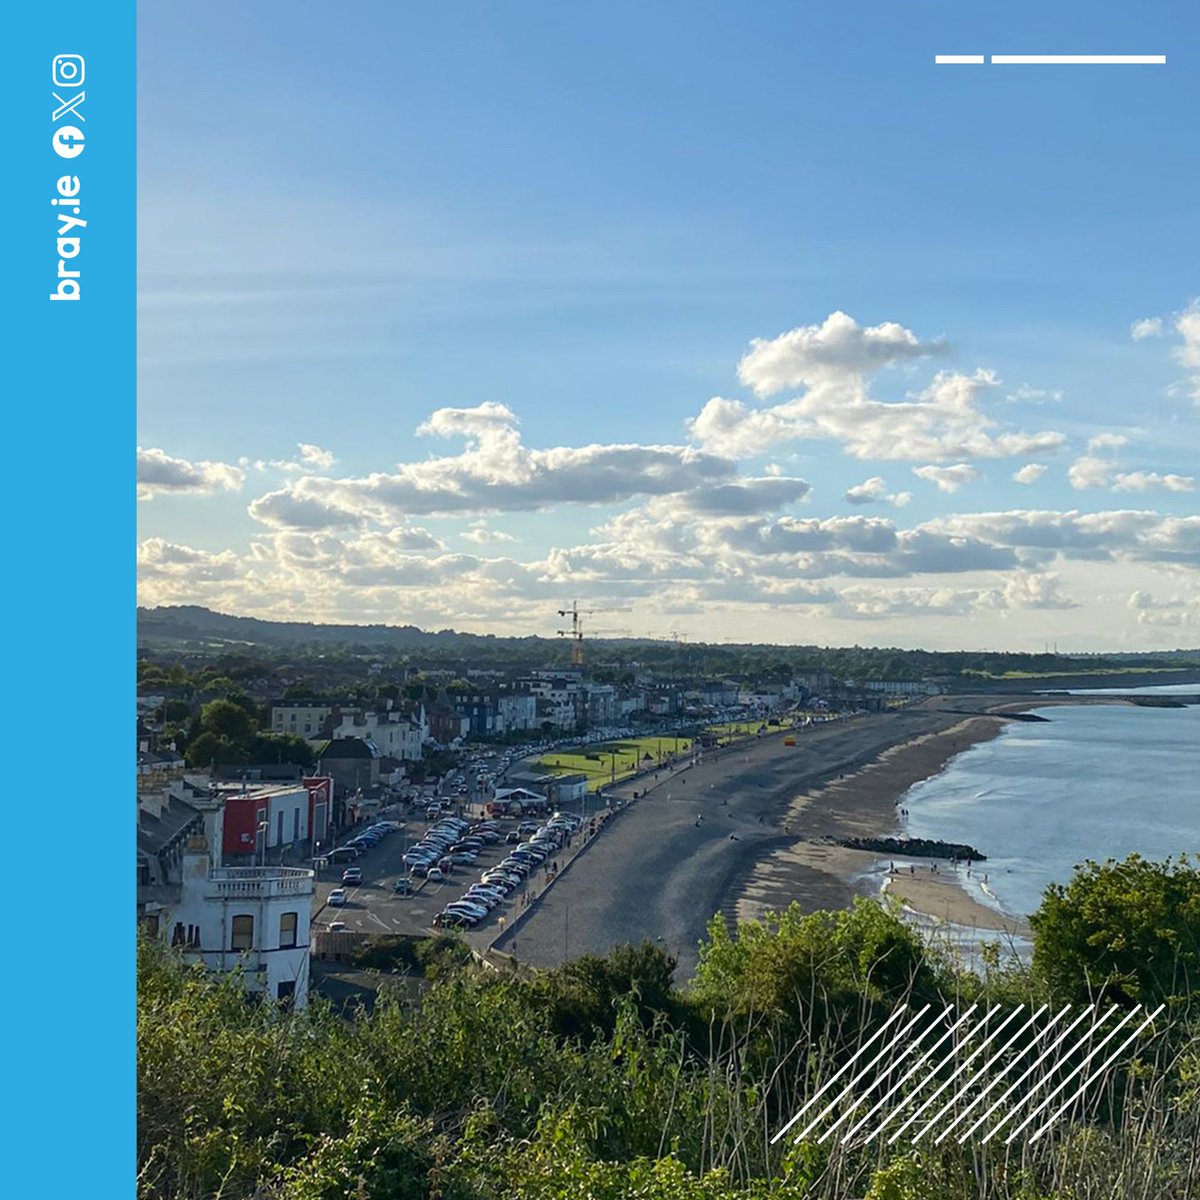 No matter what season it is, evenings are beautiful in #Bray... This summer why not make a break for #Bray? Plan your visit ➜ bray.ie ##SummerInBray #LoveBray